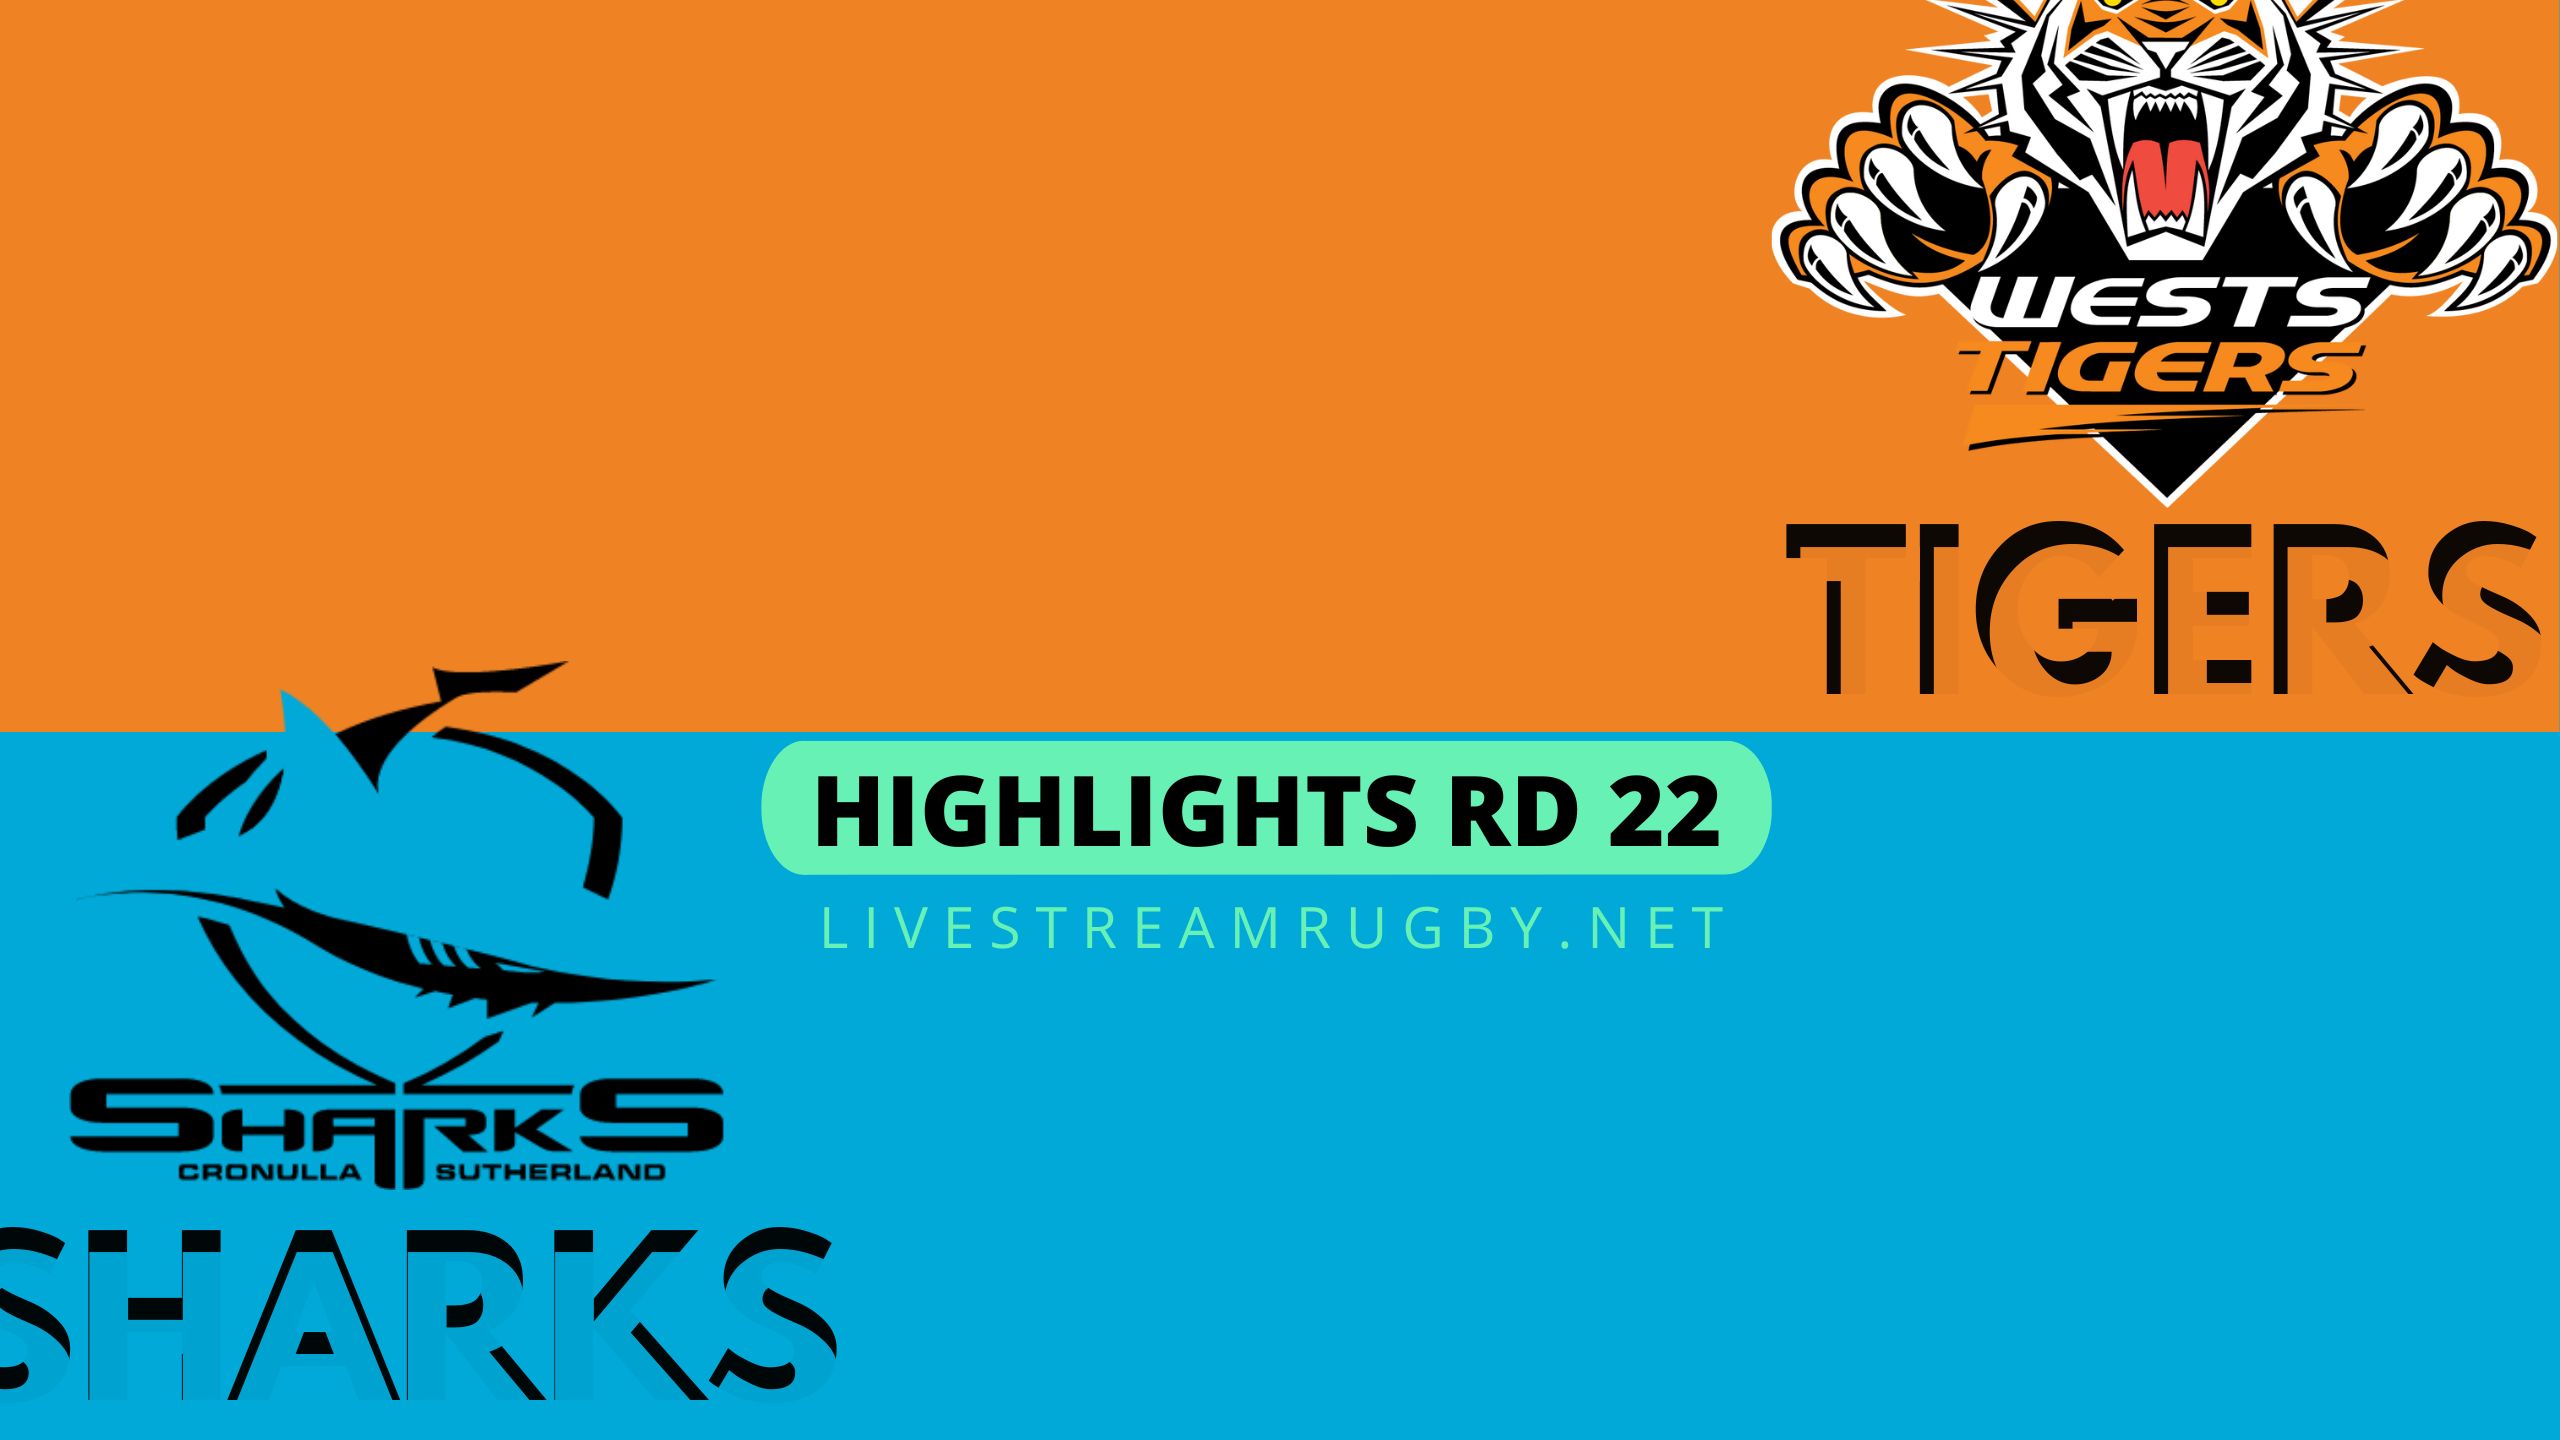 Wests Tigers Vs Sharks Highlights 2022 Rd 22 NRL Rugby